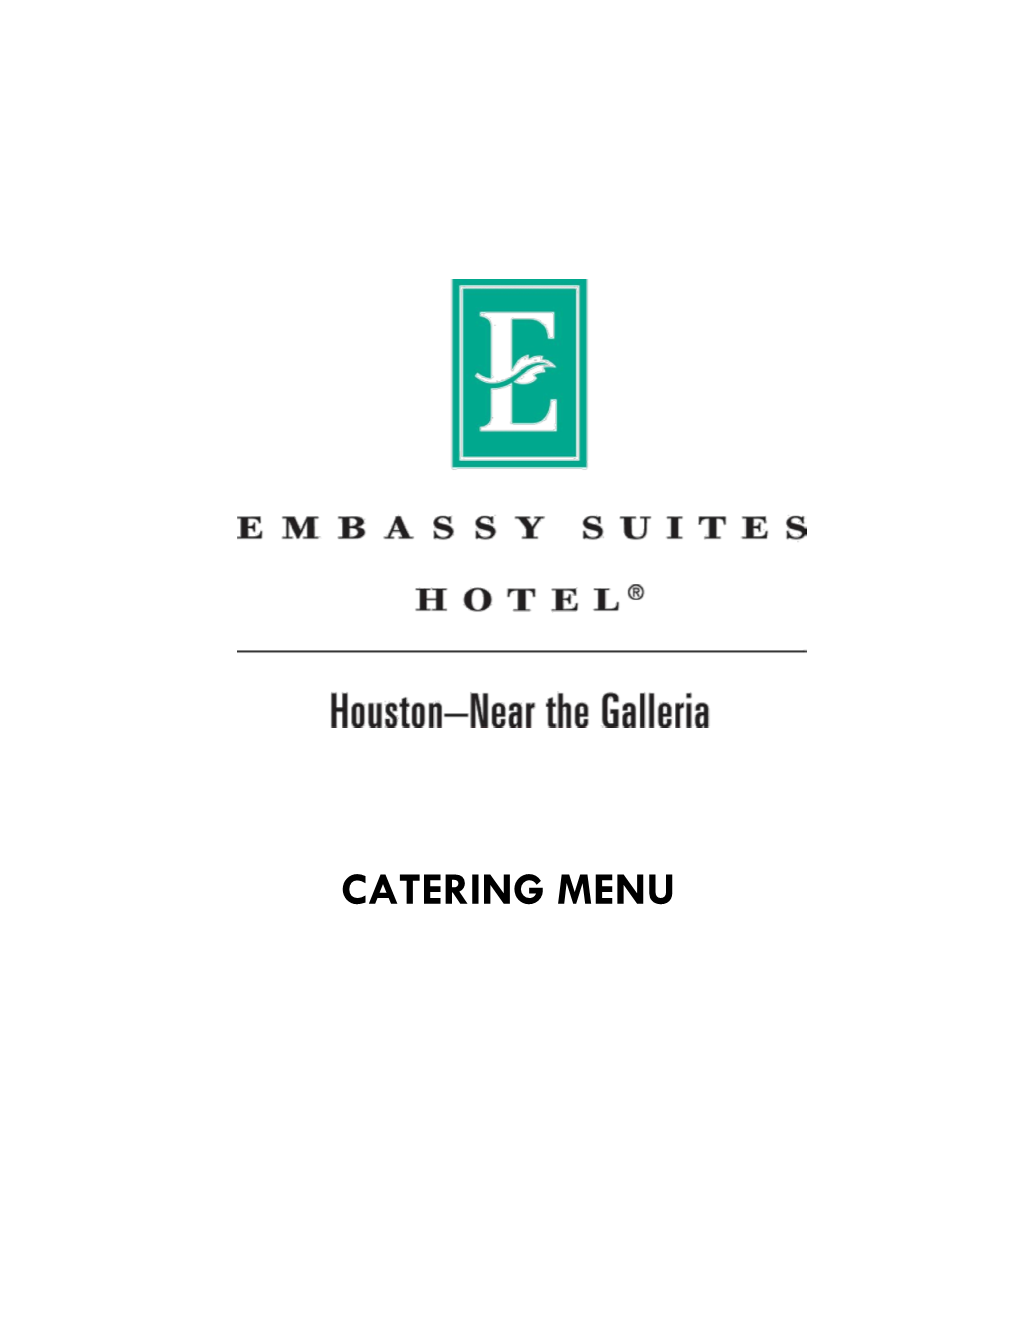 CATERING MENU MORNING BREAKFAST BUFFETS All Breakfasts Include Starbuck’S Regular and Decaffeinated Coffee, Assorted Tazo Teas & Fresh Fruit Juices